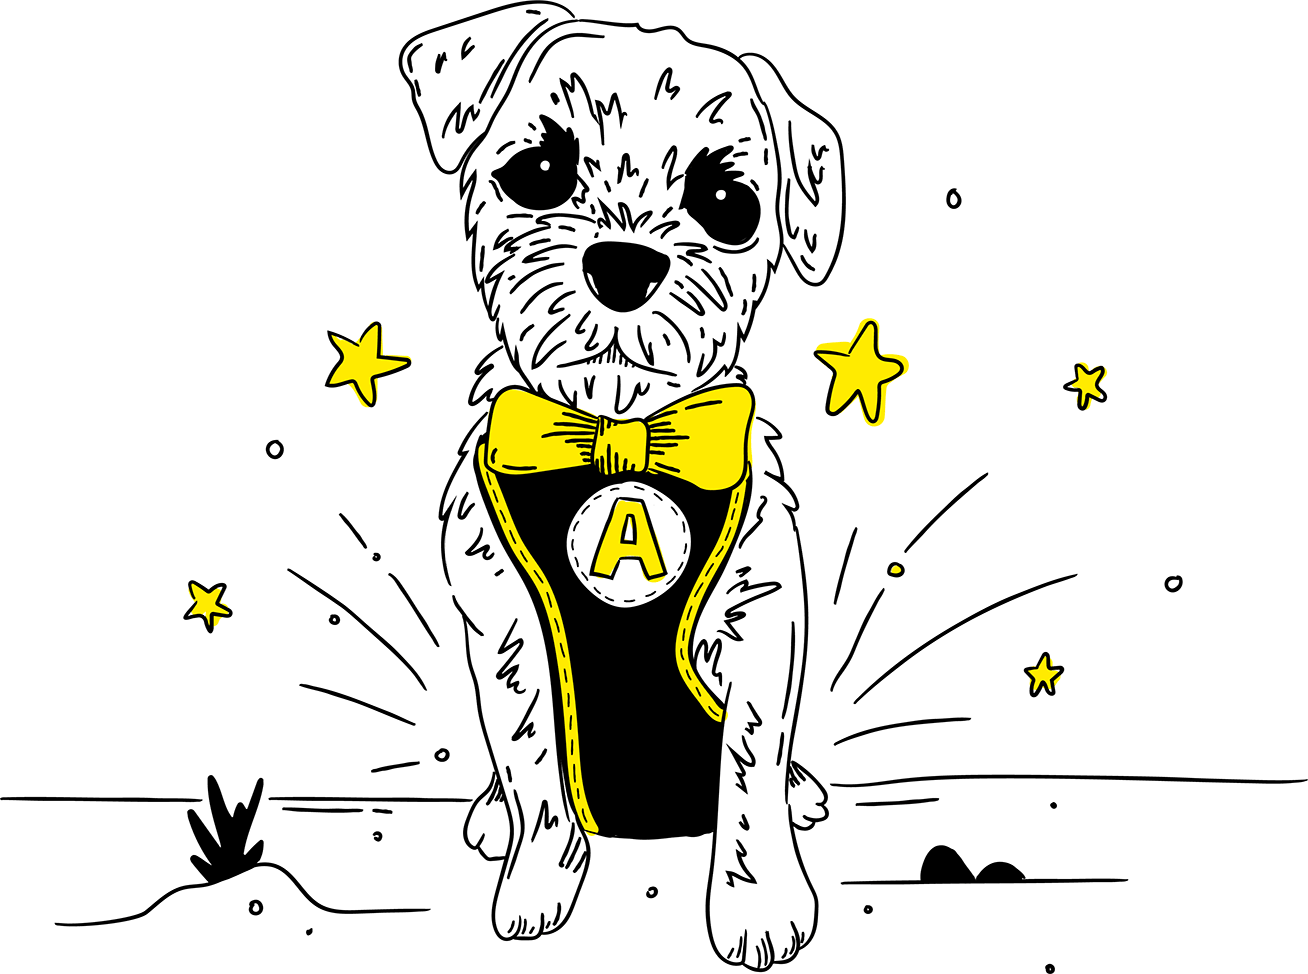 Illustration of Winston, one of the Alive dogs